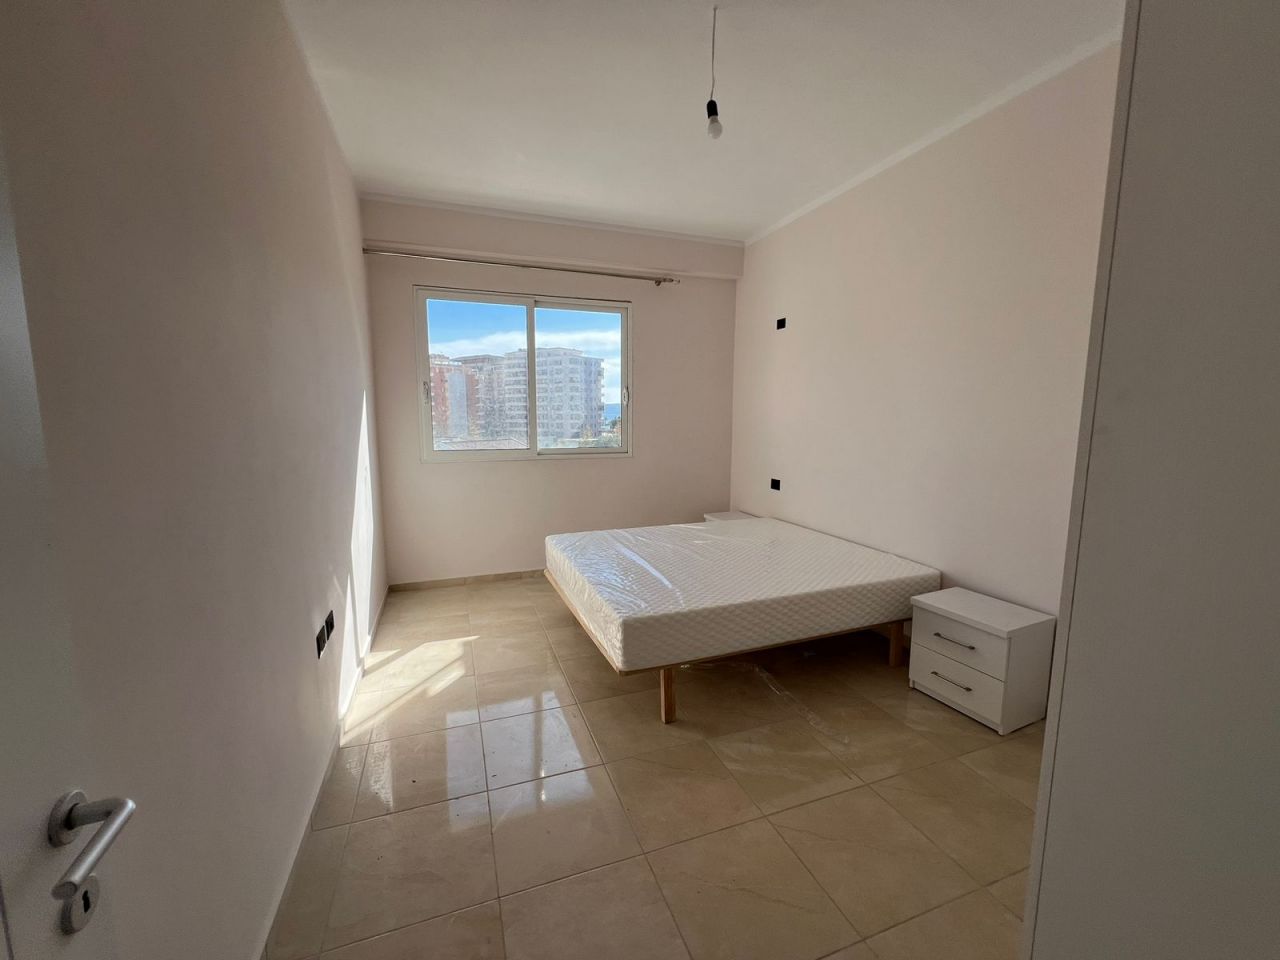 Apartment For Sale In Vlora Albania, Located In A Good Area, With All The Facilities Nearby